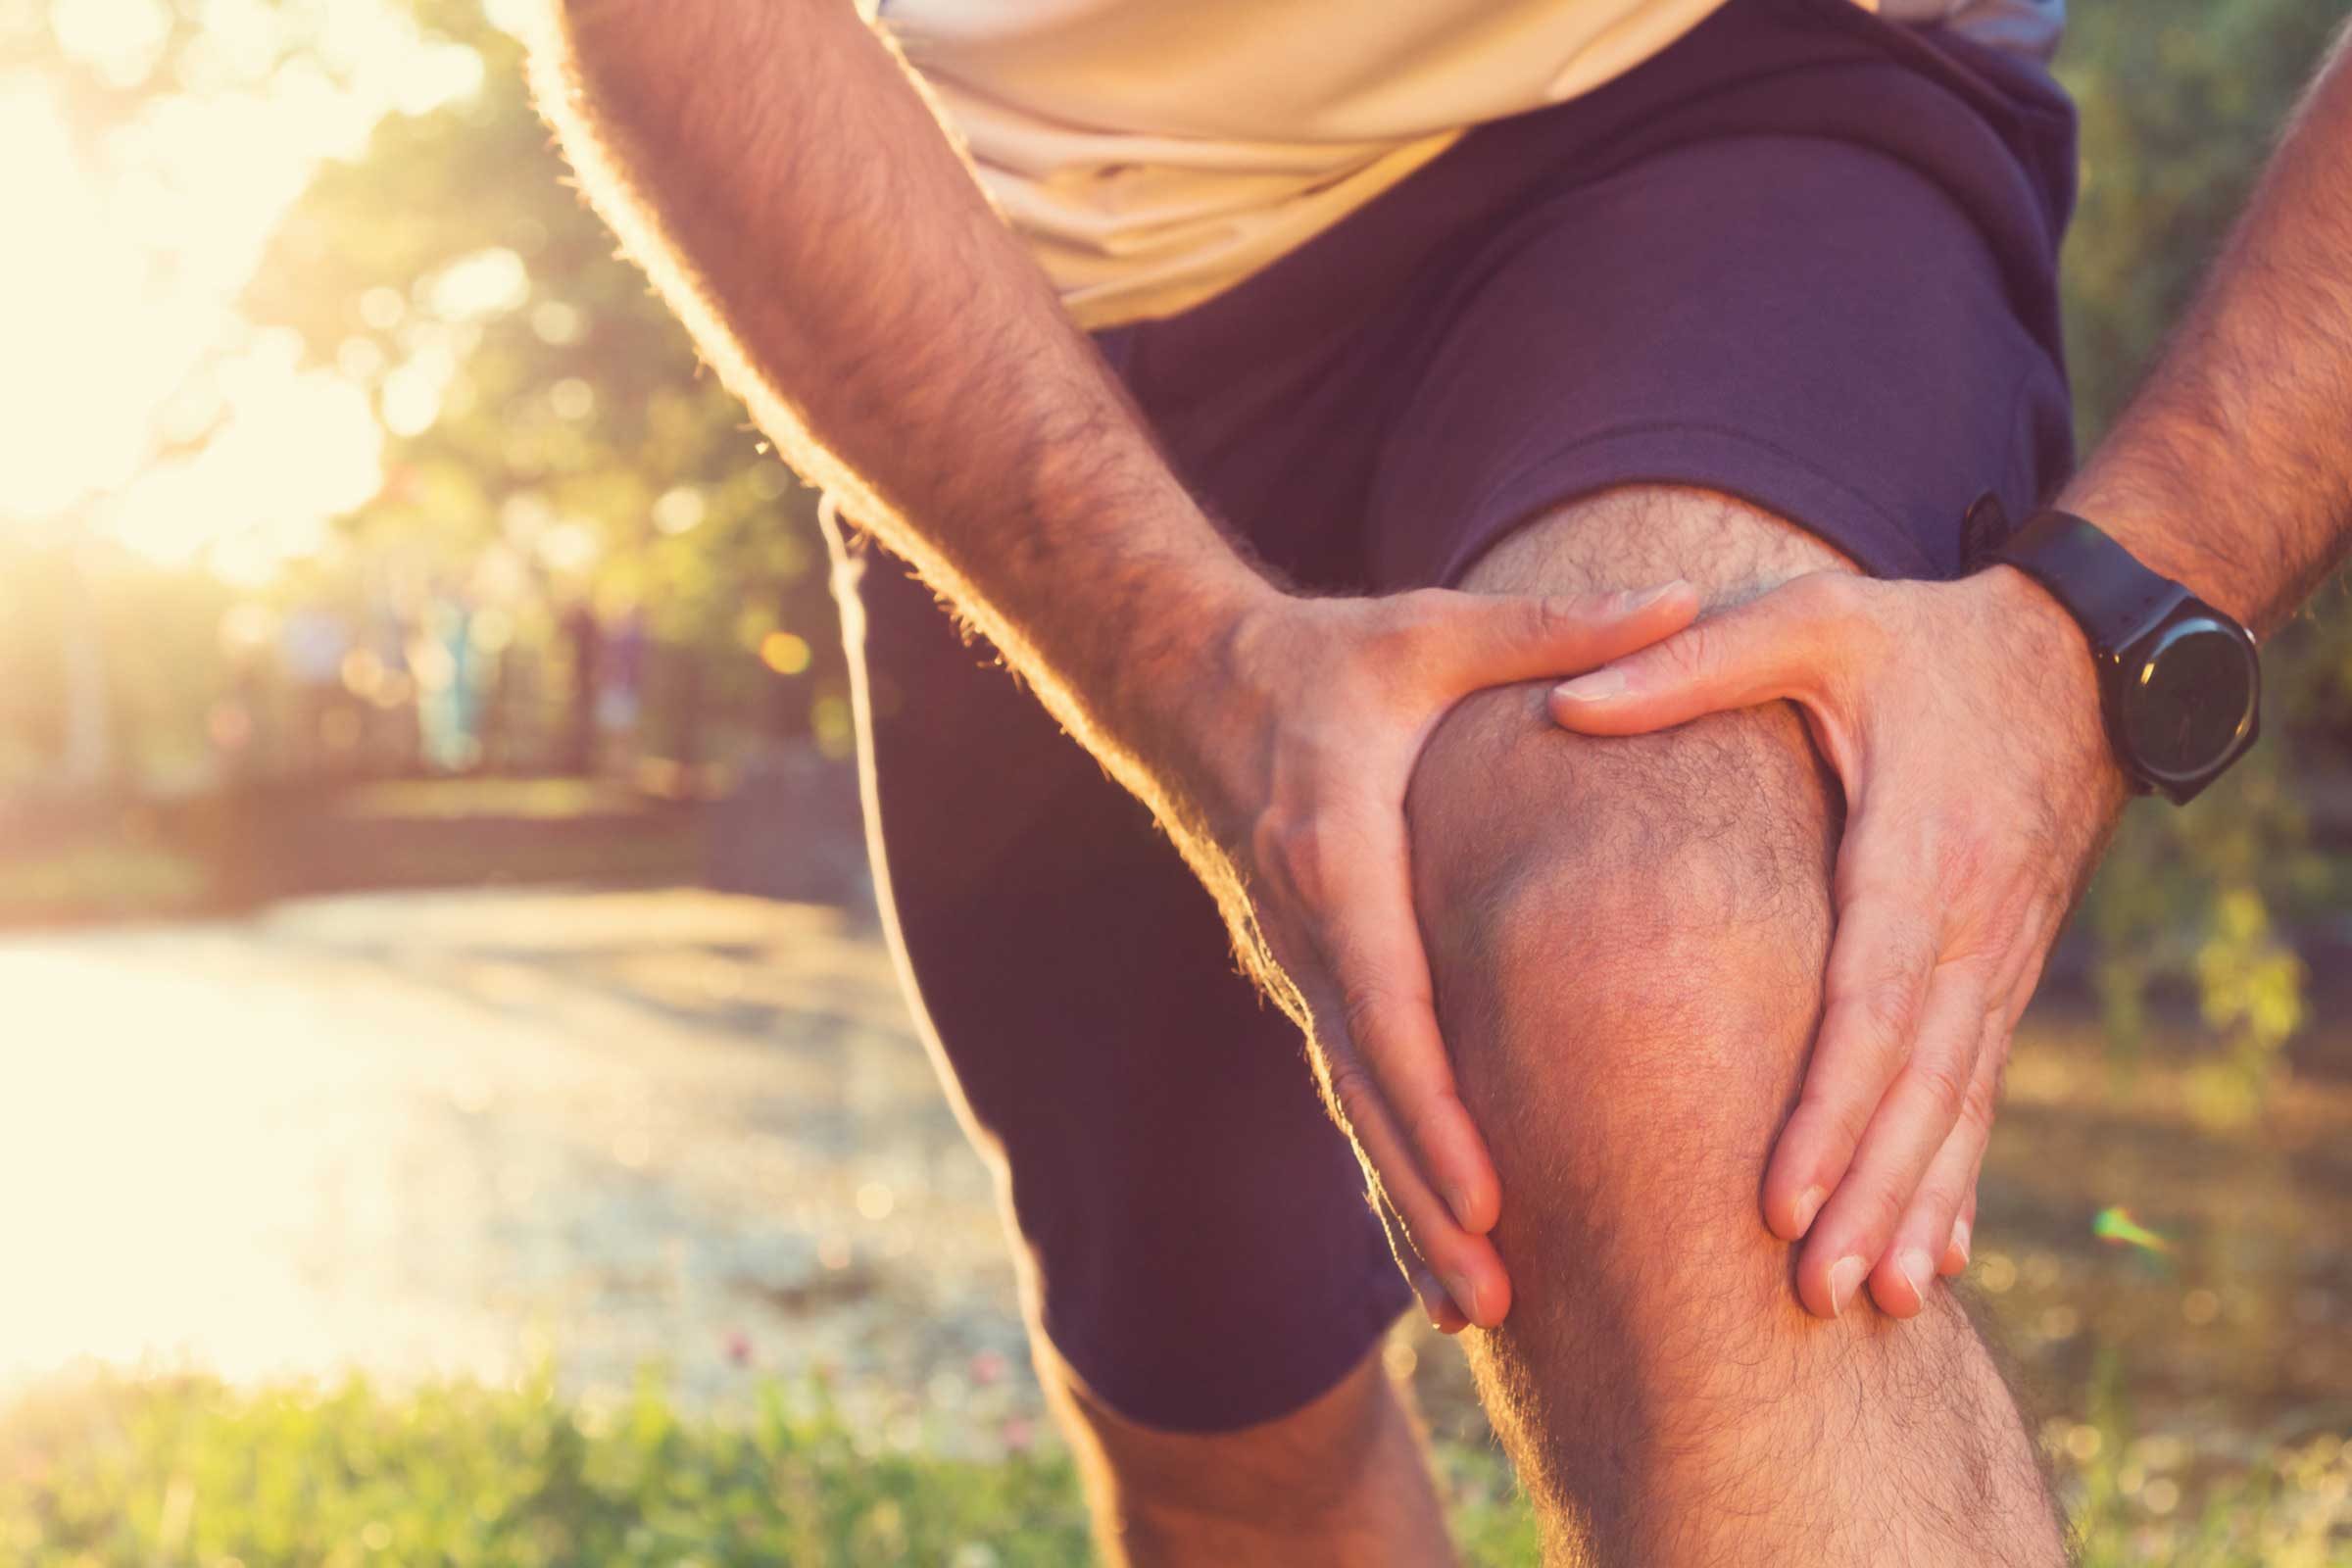 7 Types of Leg Pain (and When to Take Them Seriously)